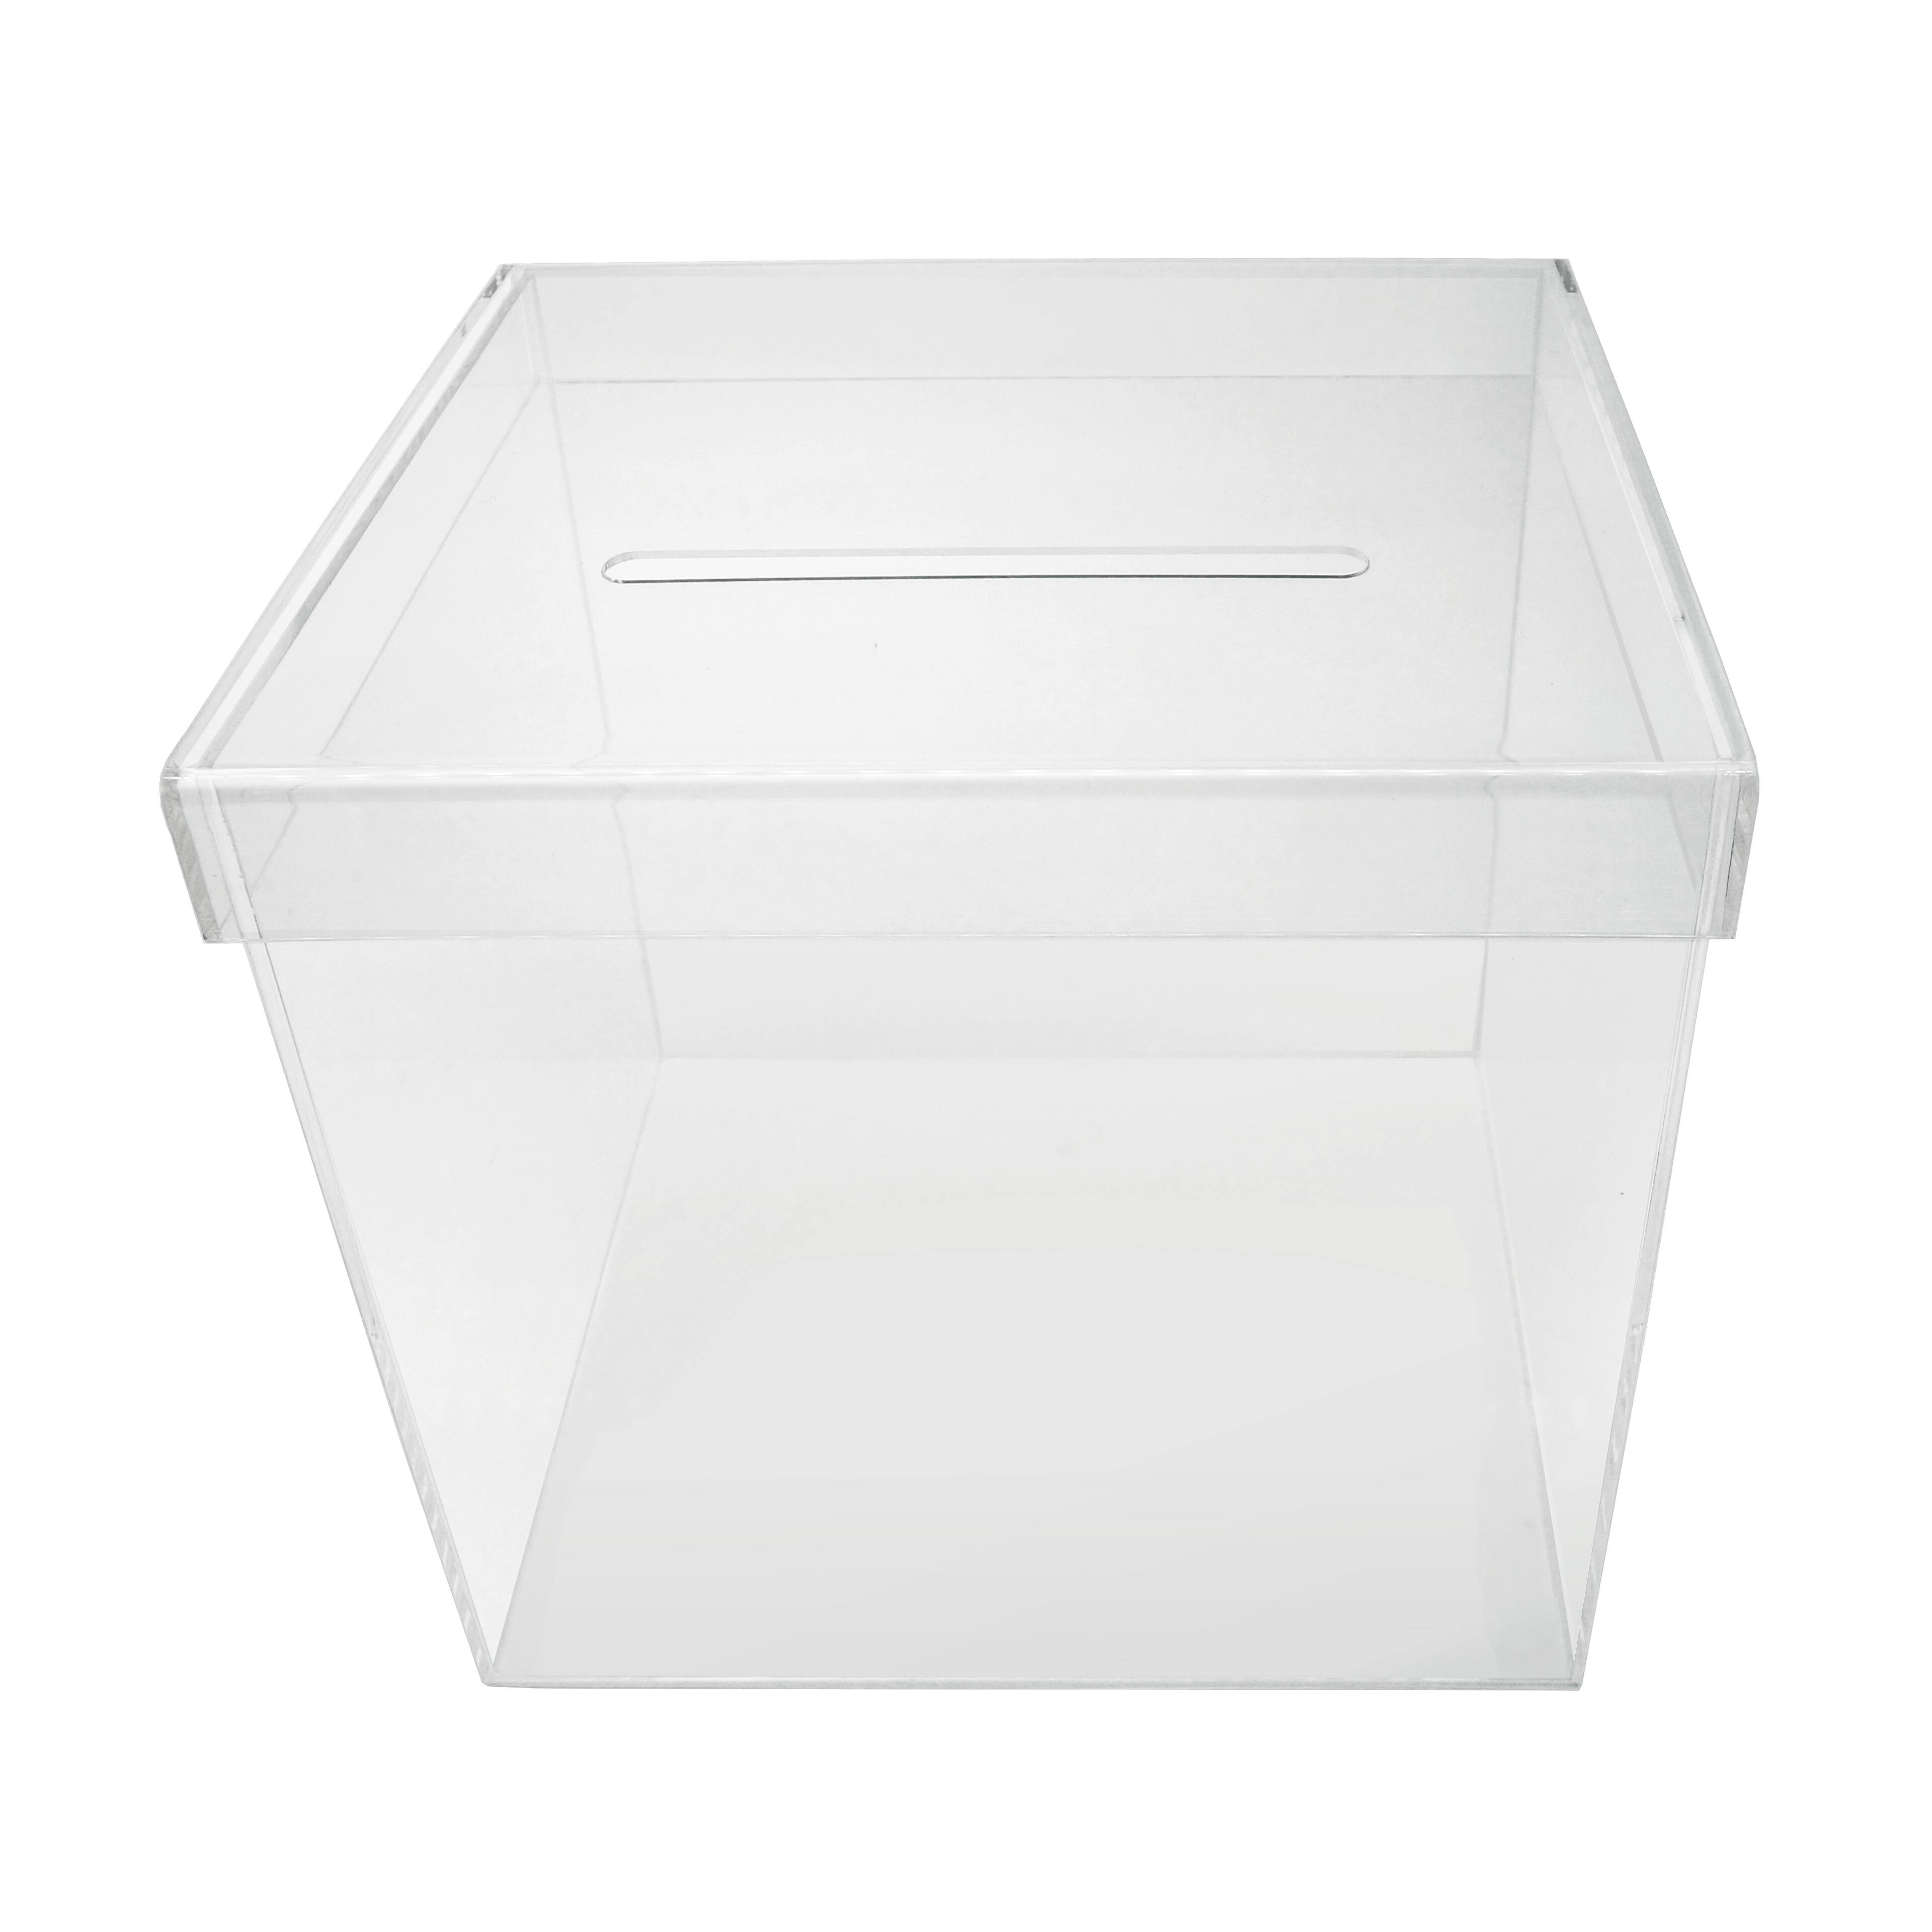 Oversized Acrylic Containers With Lids